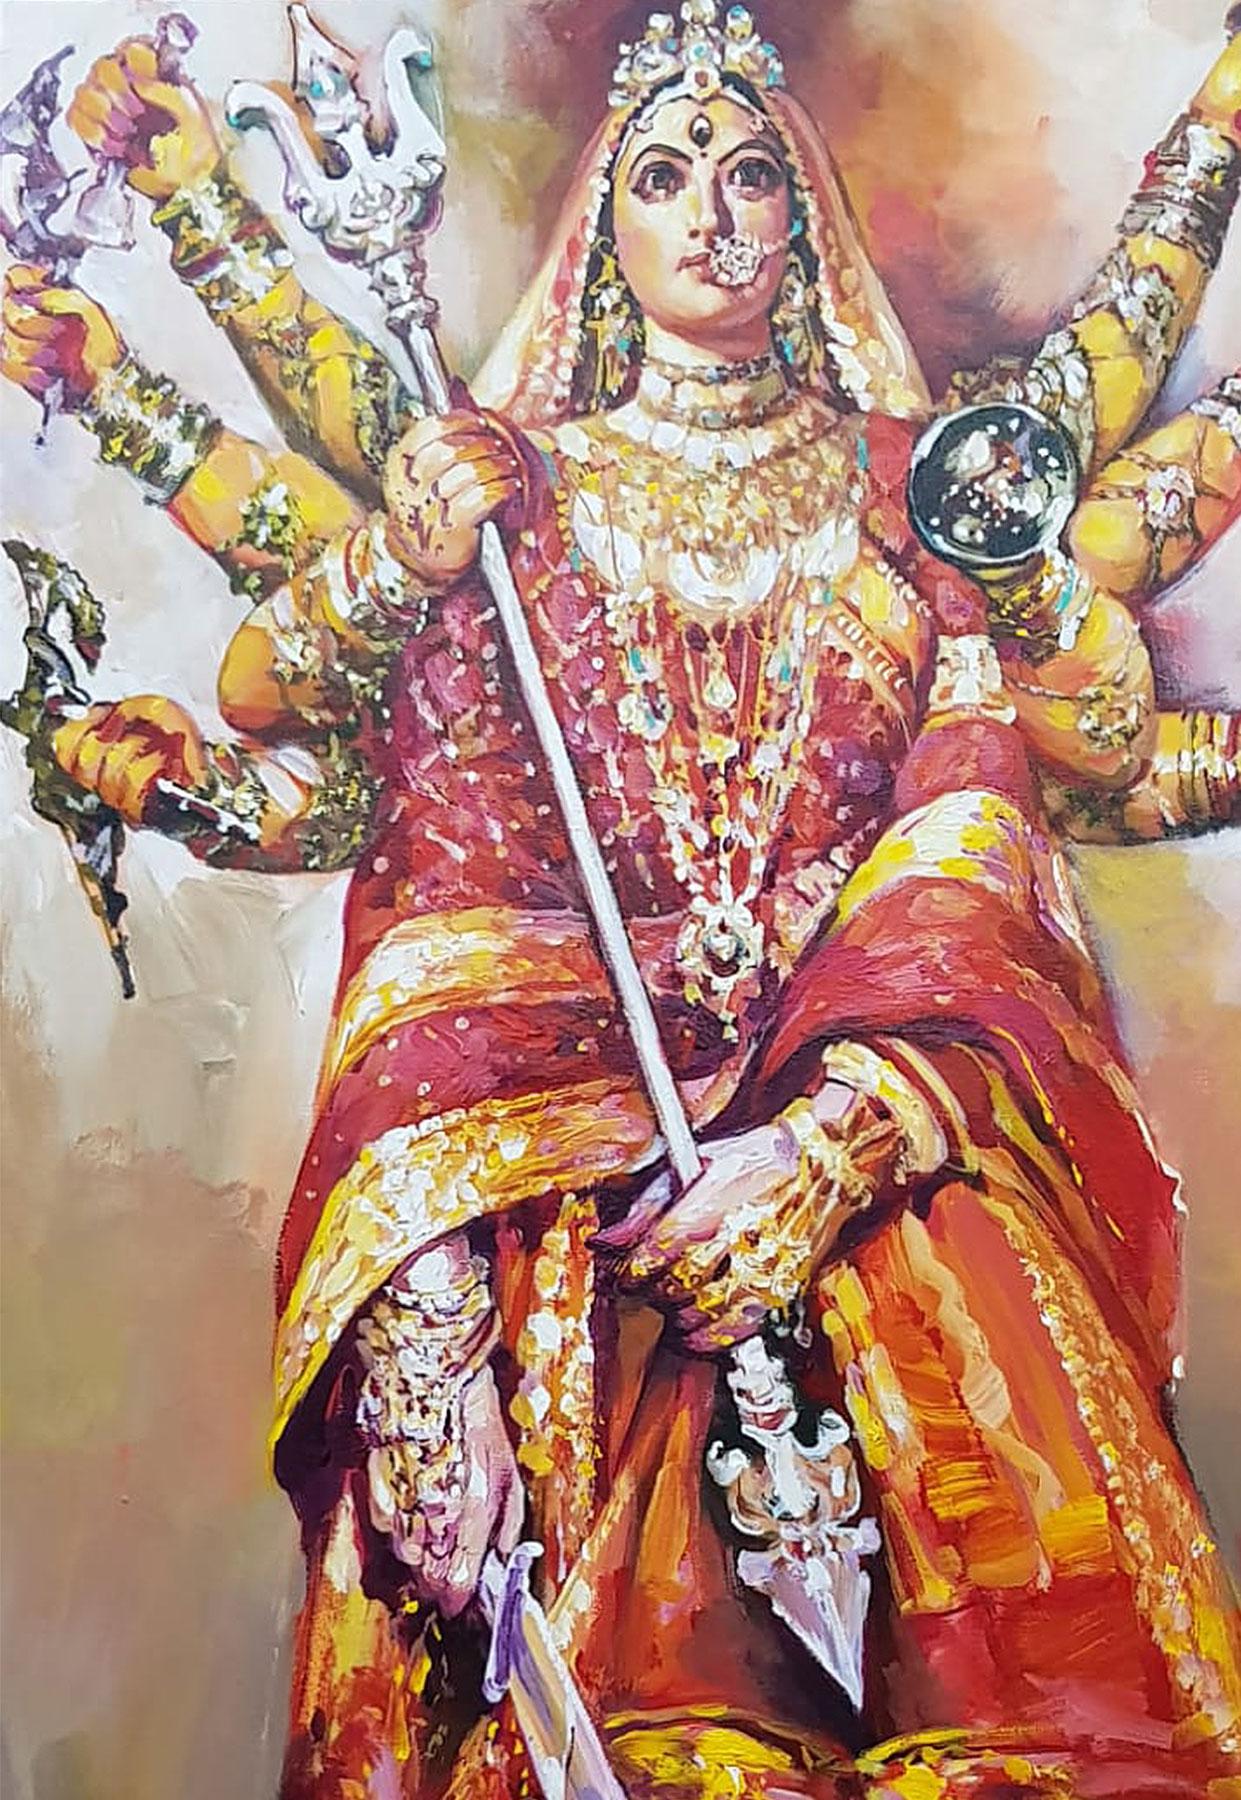 Subrata Gangopadhyay - Durga - 36 x 24 inches (unframed size)
Acrylic on Canvas 
Inclusive of shipment in roll form.

Style : He is widely considered one of India's leading painters in the modern realistic tradition. The strength of his lines and